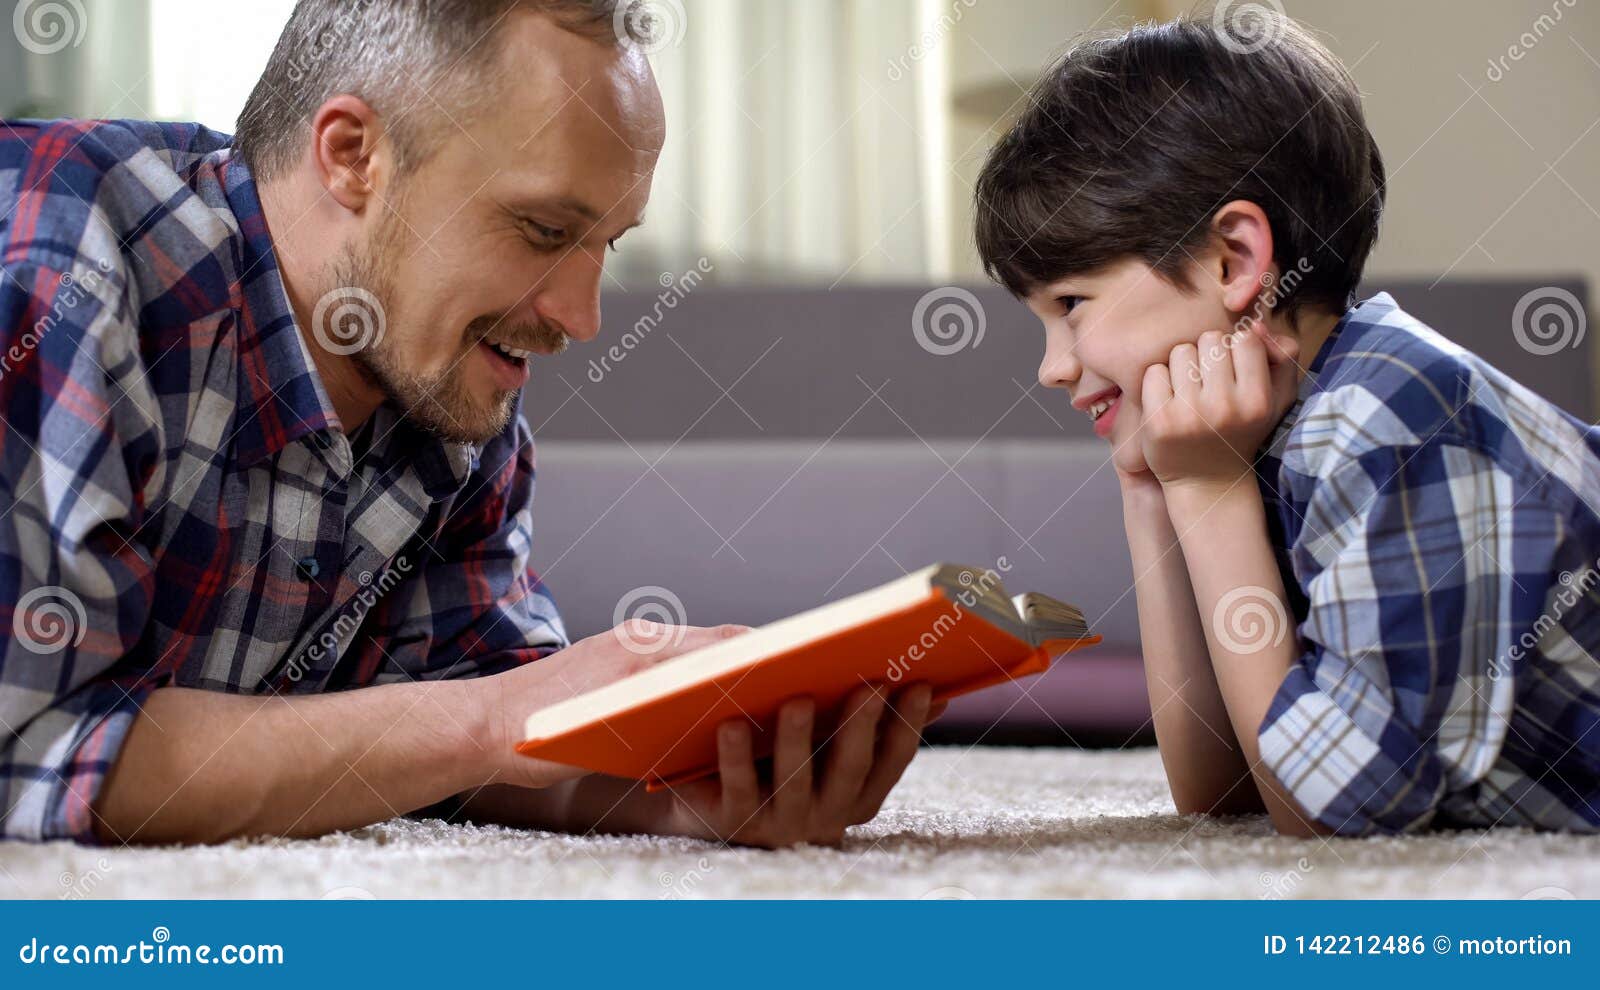 dad reading son exciting fantasy book, imagination and creativity, leisure time